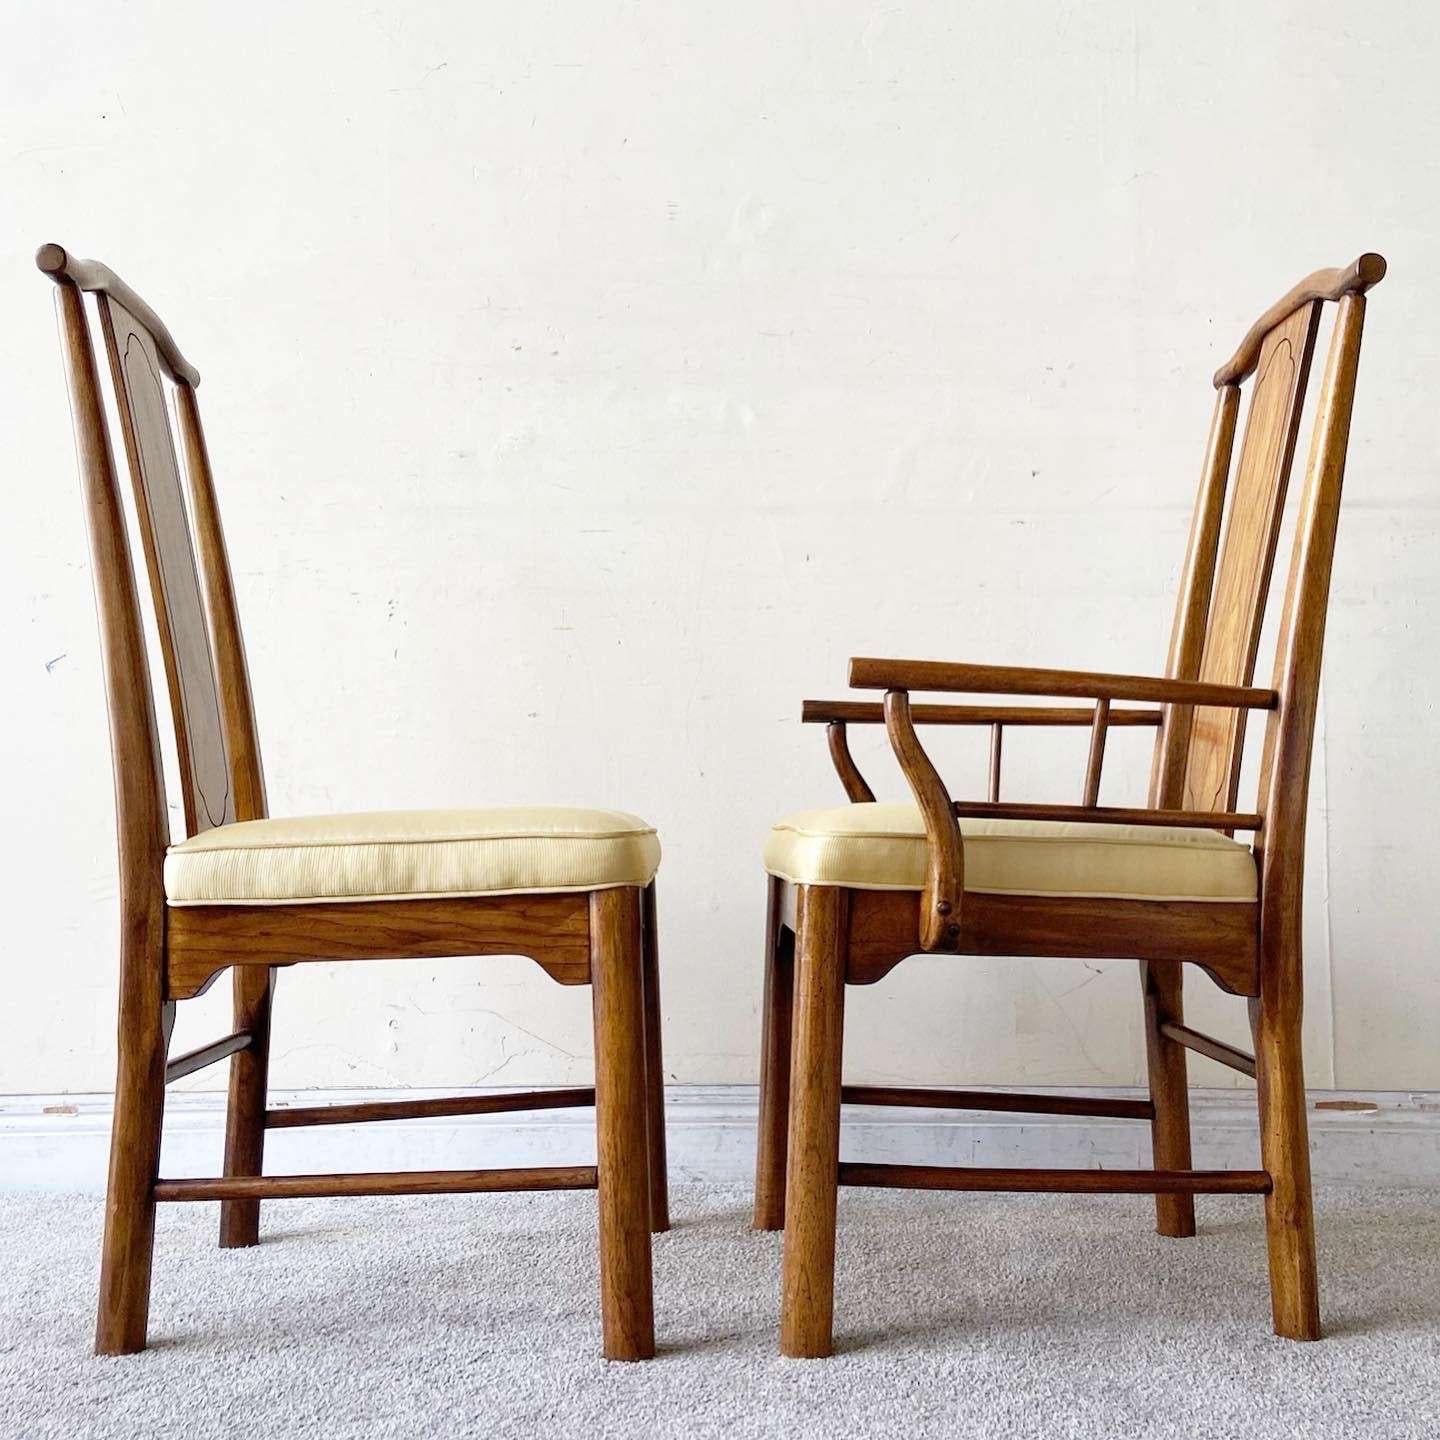 Vintage Chinoiserie Wooden Dining Chairs - Set of 6 In Good Condition For Sale In Delray Beach, FL